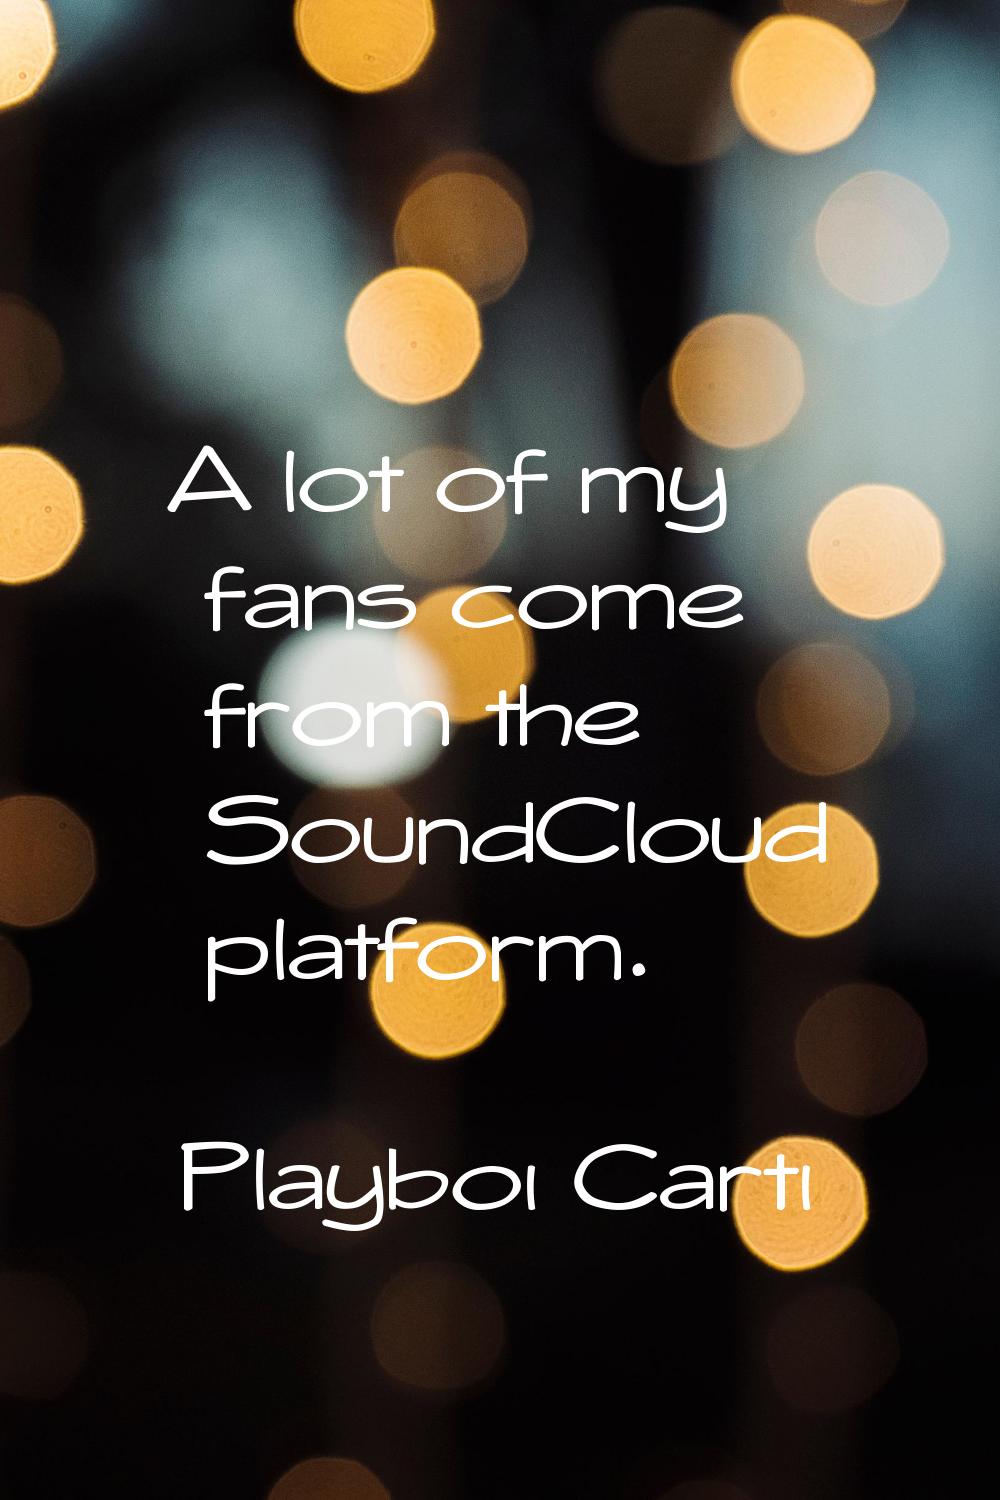 A lot of my fans come from the SoundCloud platform.